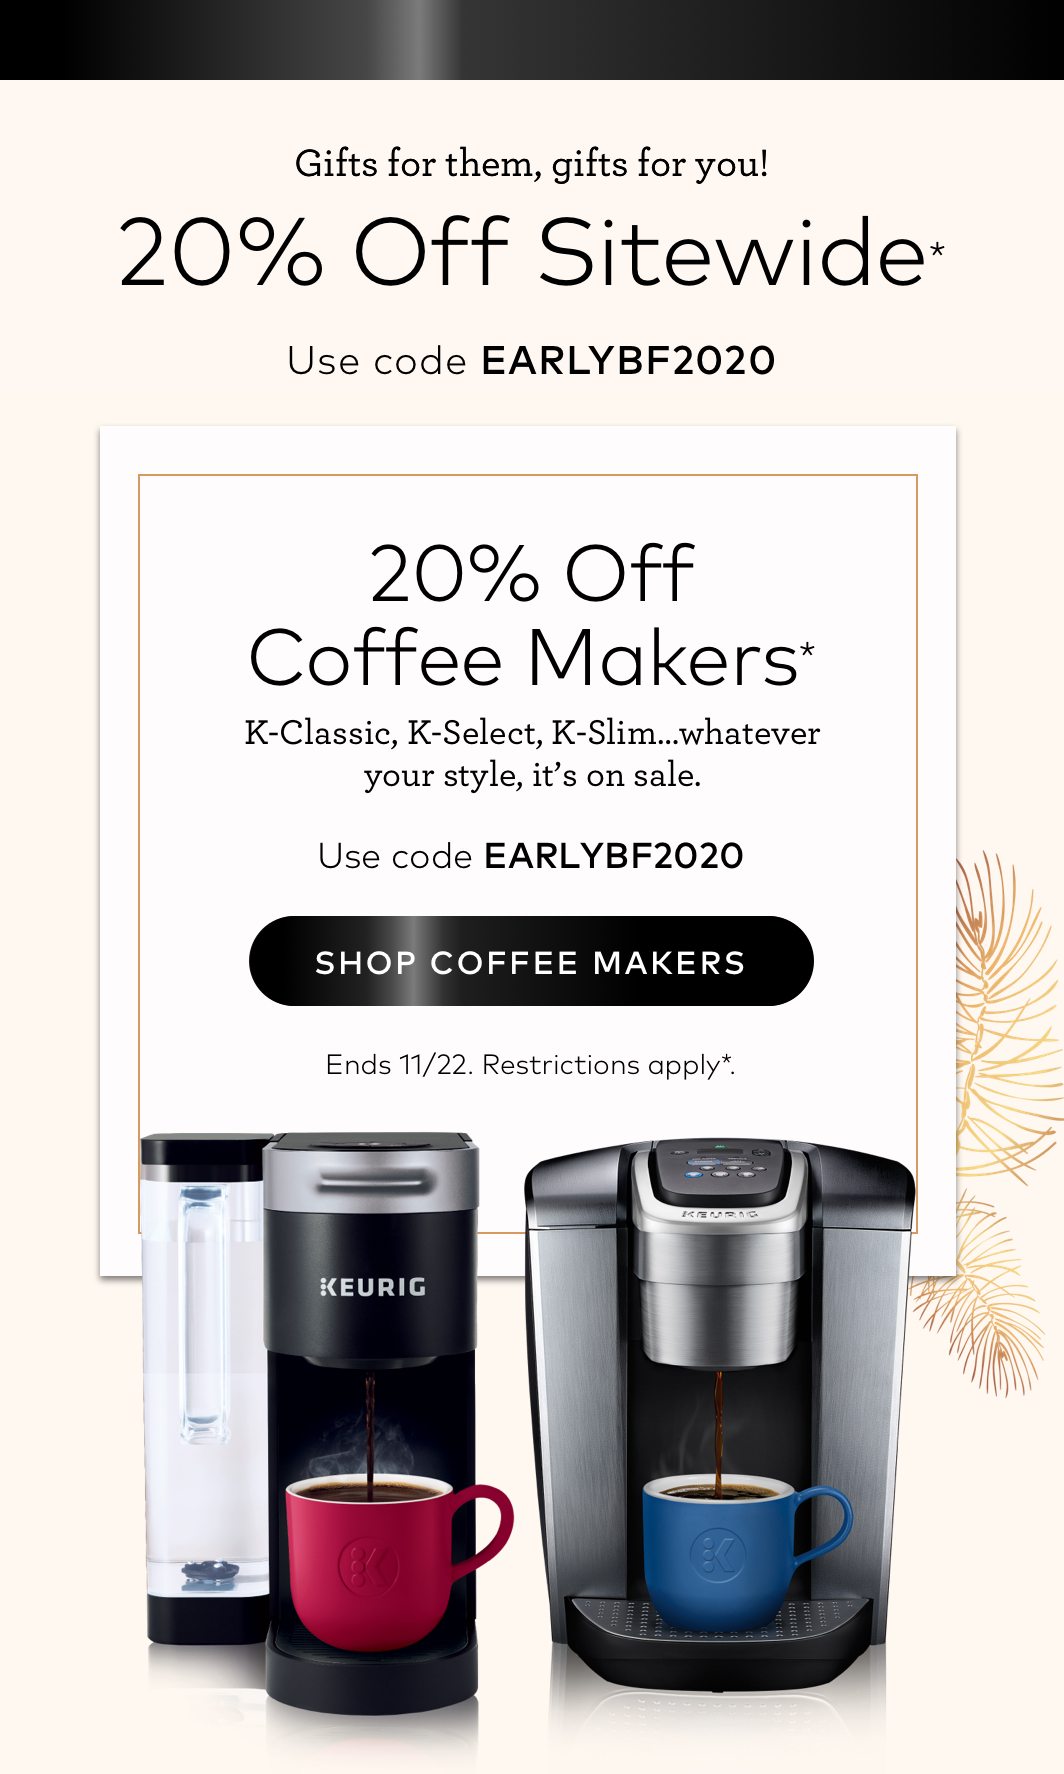 20% off Sitewide with EARLYBF2020